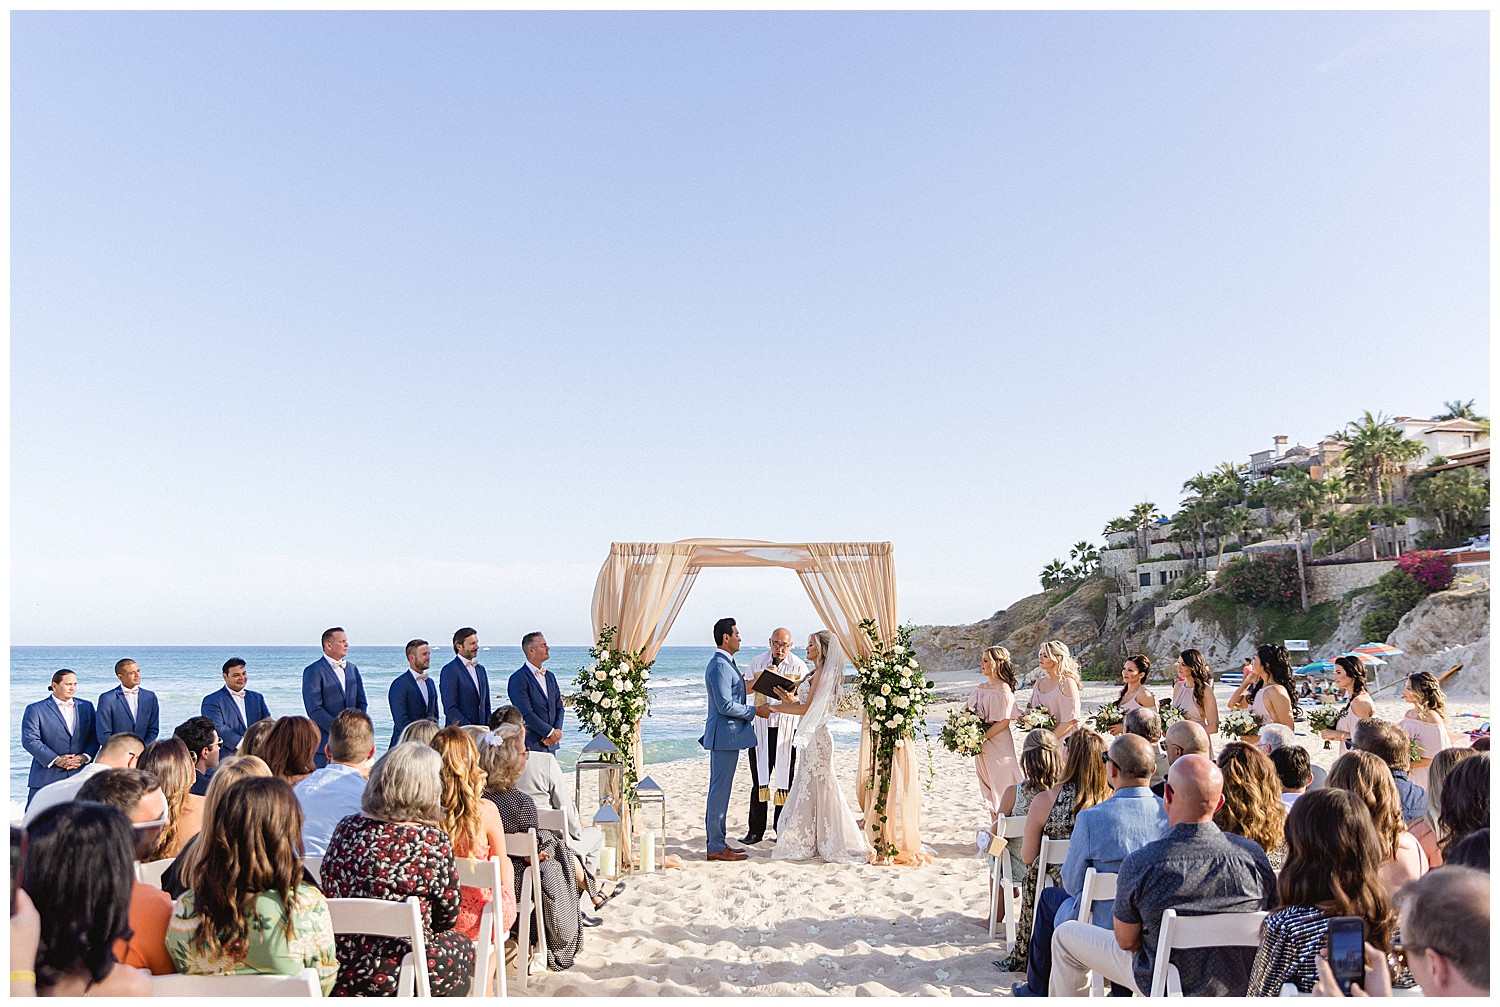 Cabo Surf hotel wedding ceremony on the beach